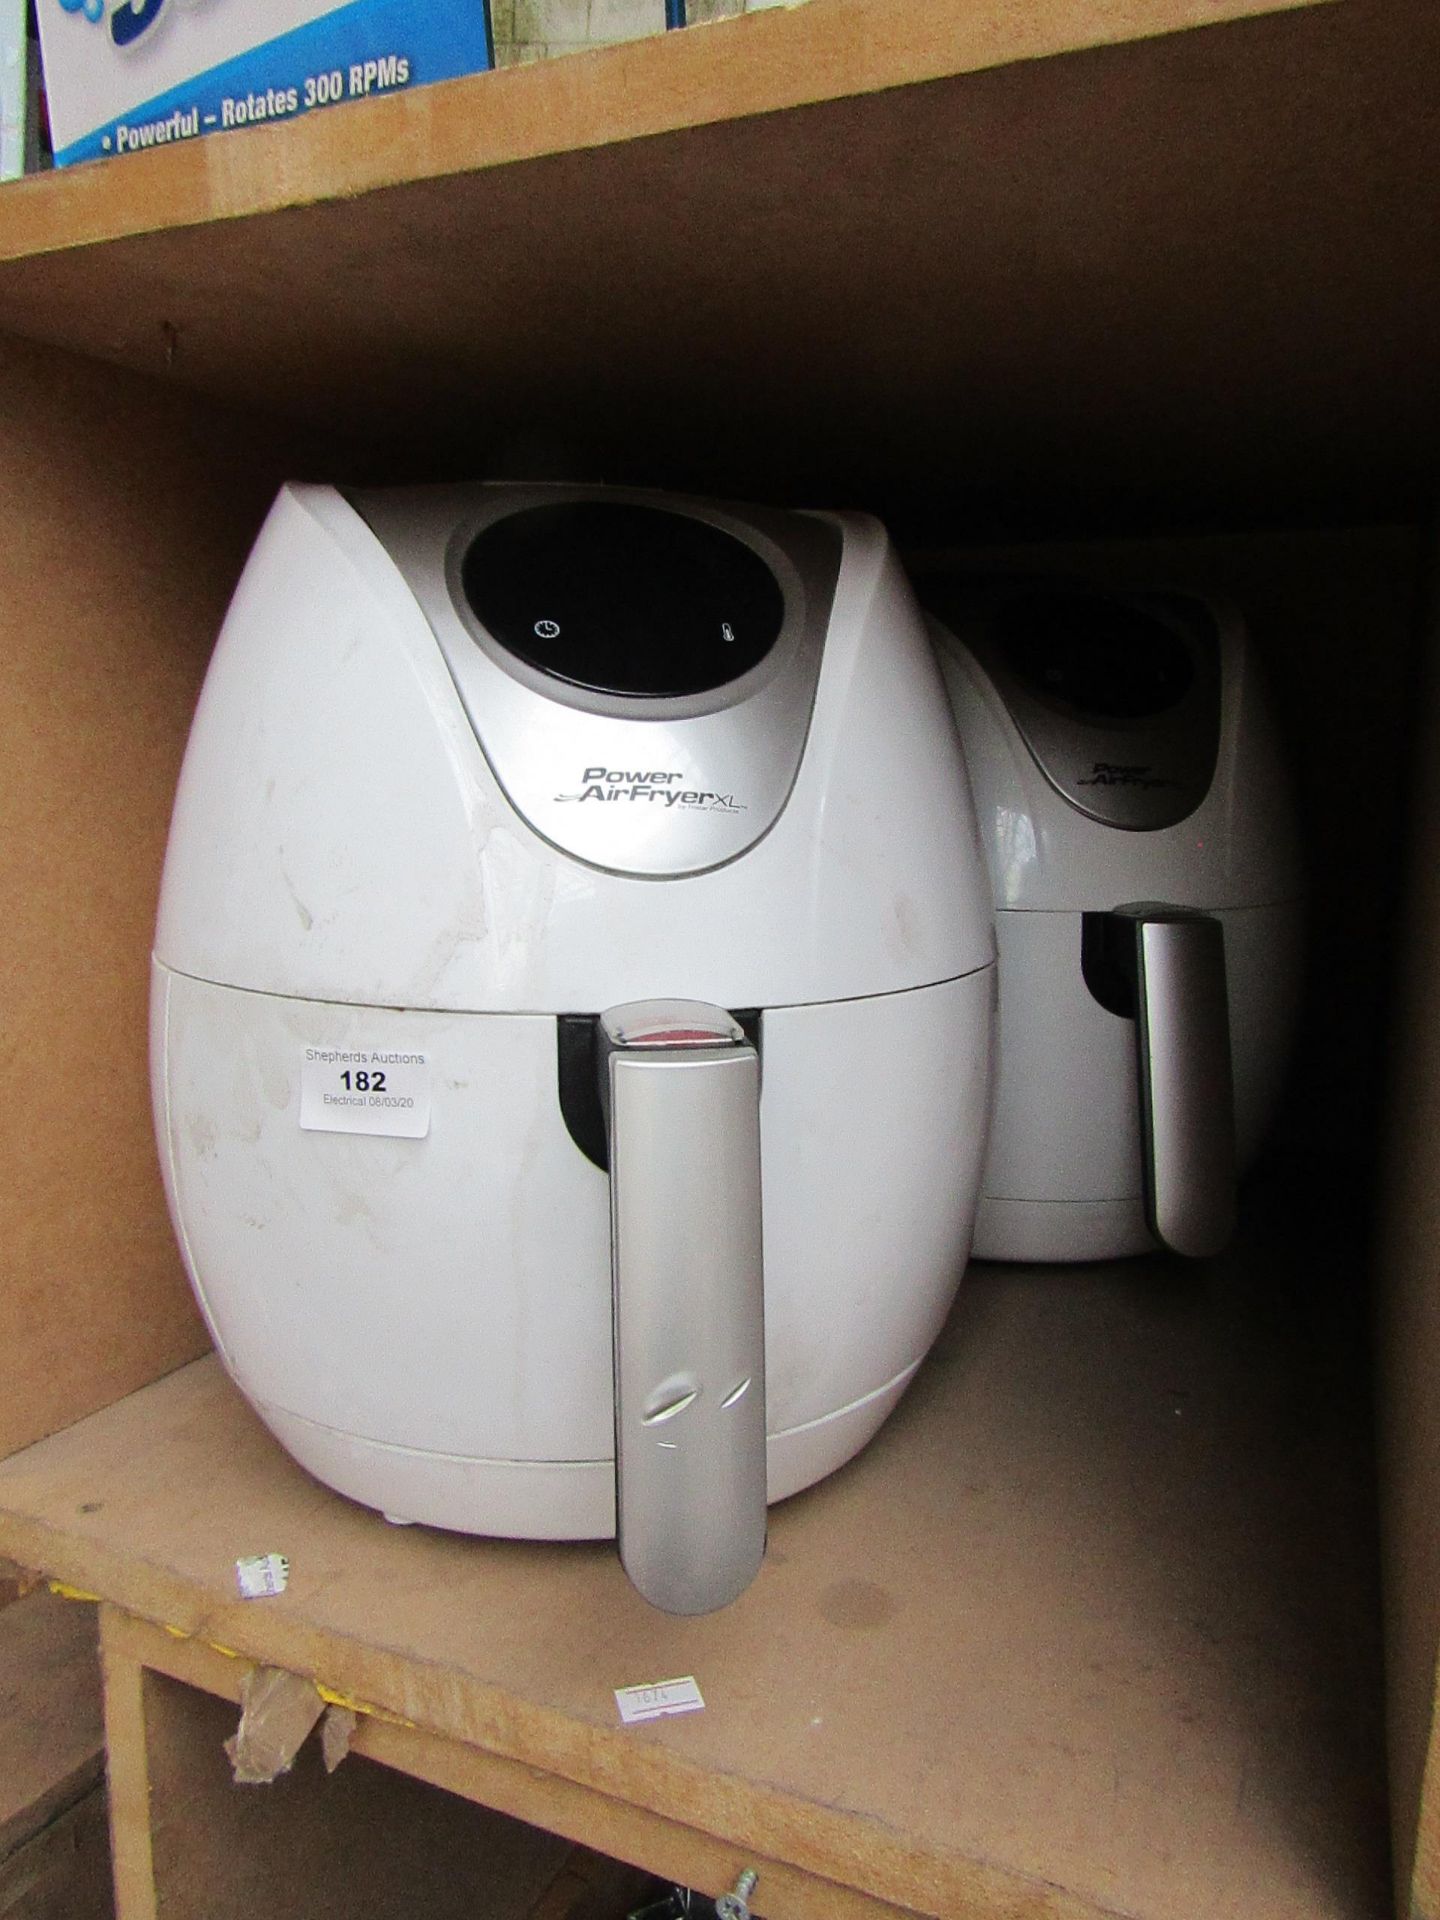 | 2x | POWER AIR FRYER XL 3.2L | TESTED WORKING BUT ONE HAS A LOOSE FAN | NO ONLINE RE-SALE | SKU